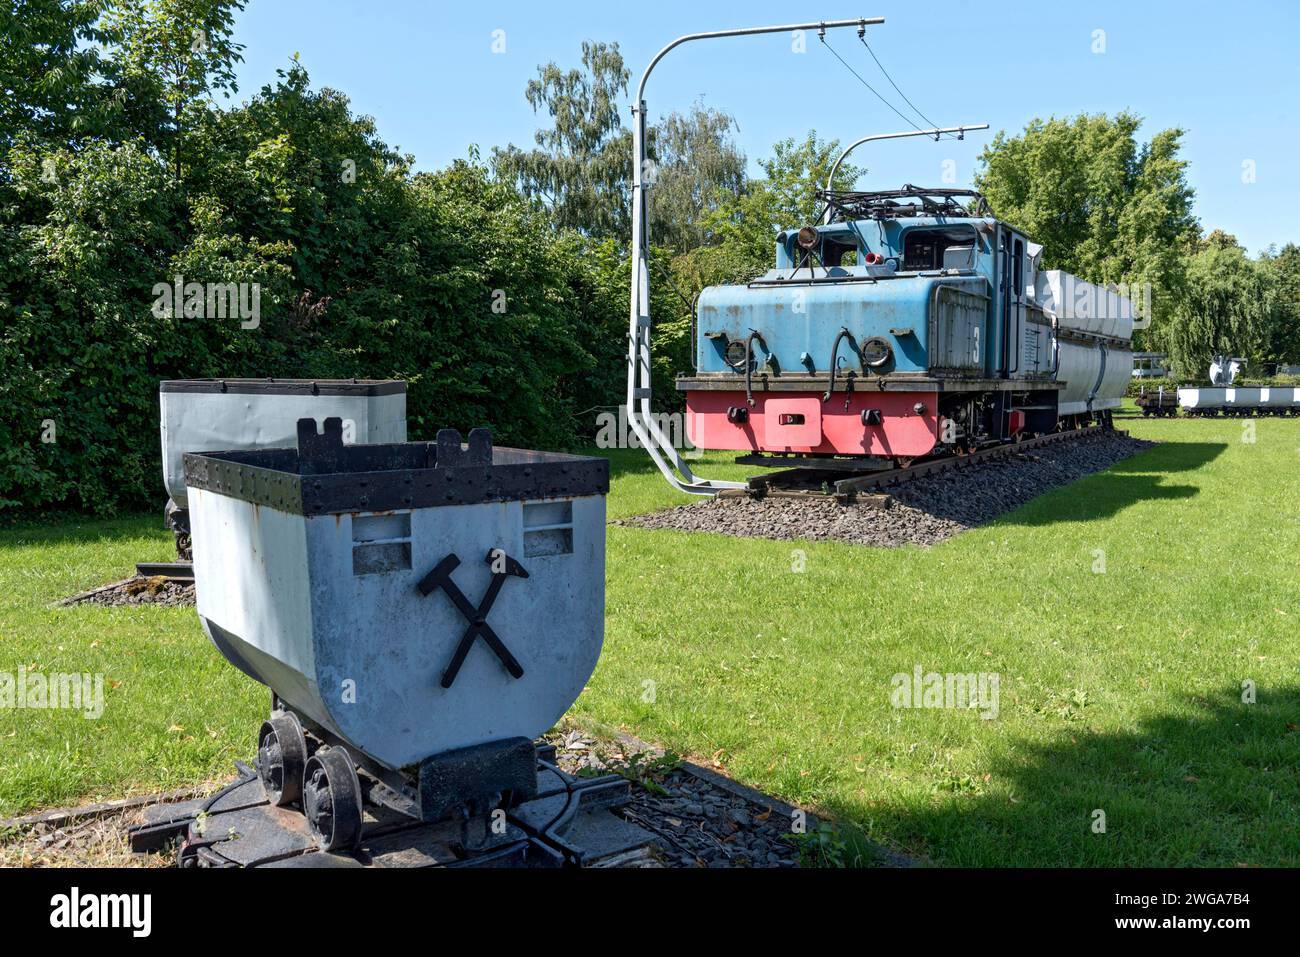 Vintage electric locomotive no. 3 from Krupp AEG with coal wagon, electric locomotive, built in 1957, wagons for transporting brown coal underground Stock Photo